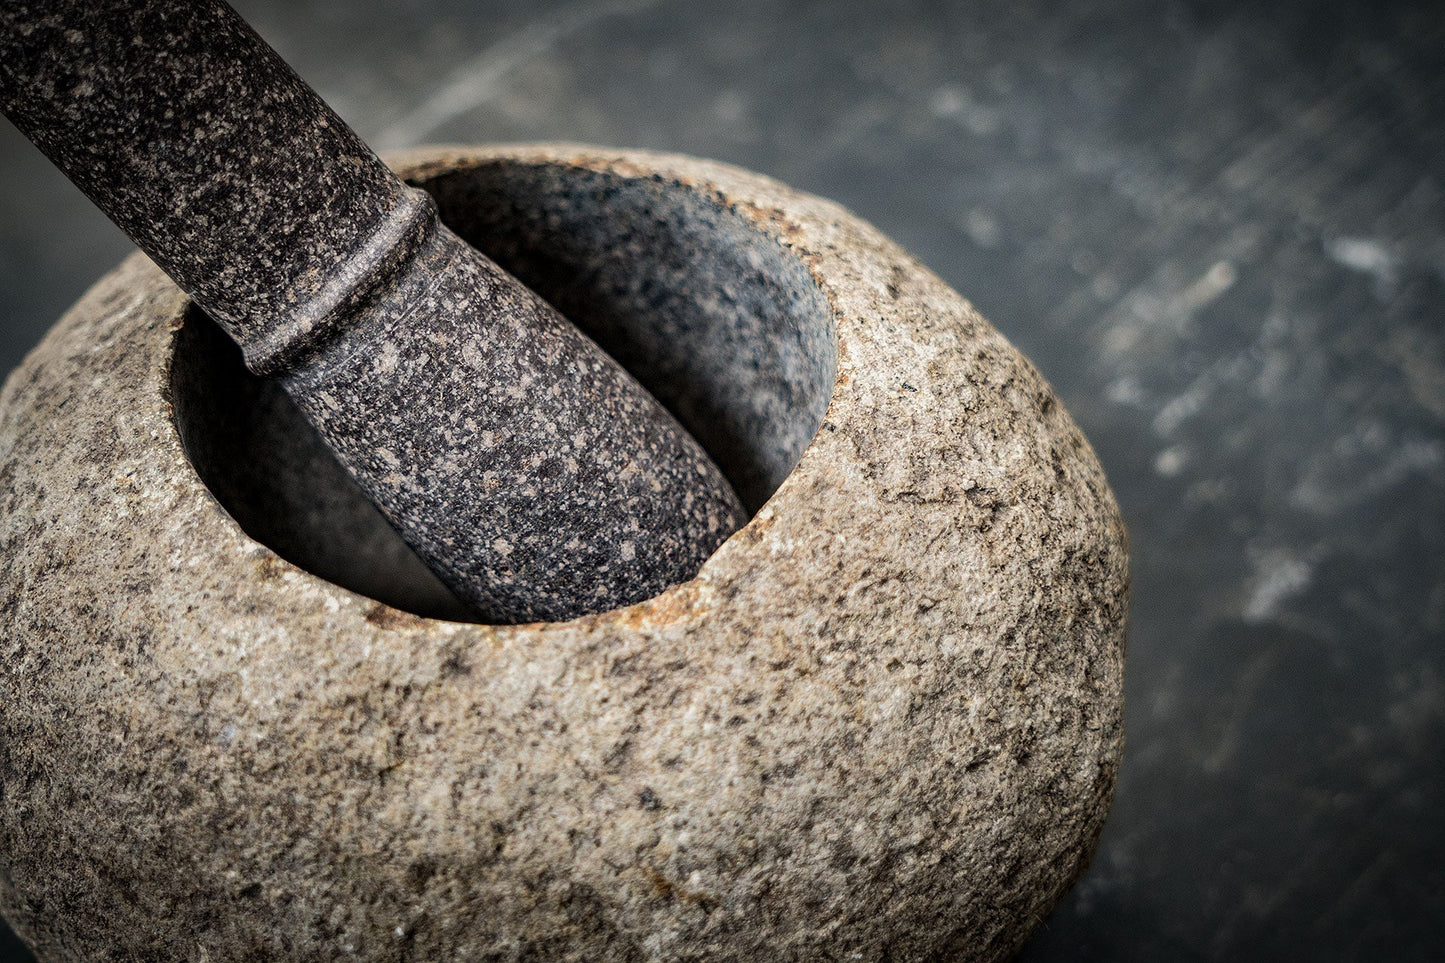 River stone mortar & pestle Natural stone mill for spices, pastes, pestos and guacamole